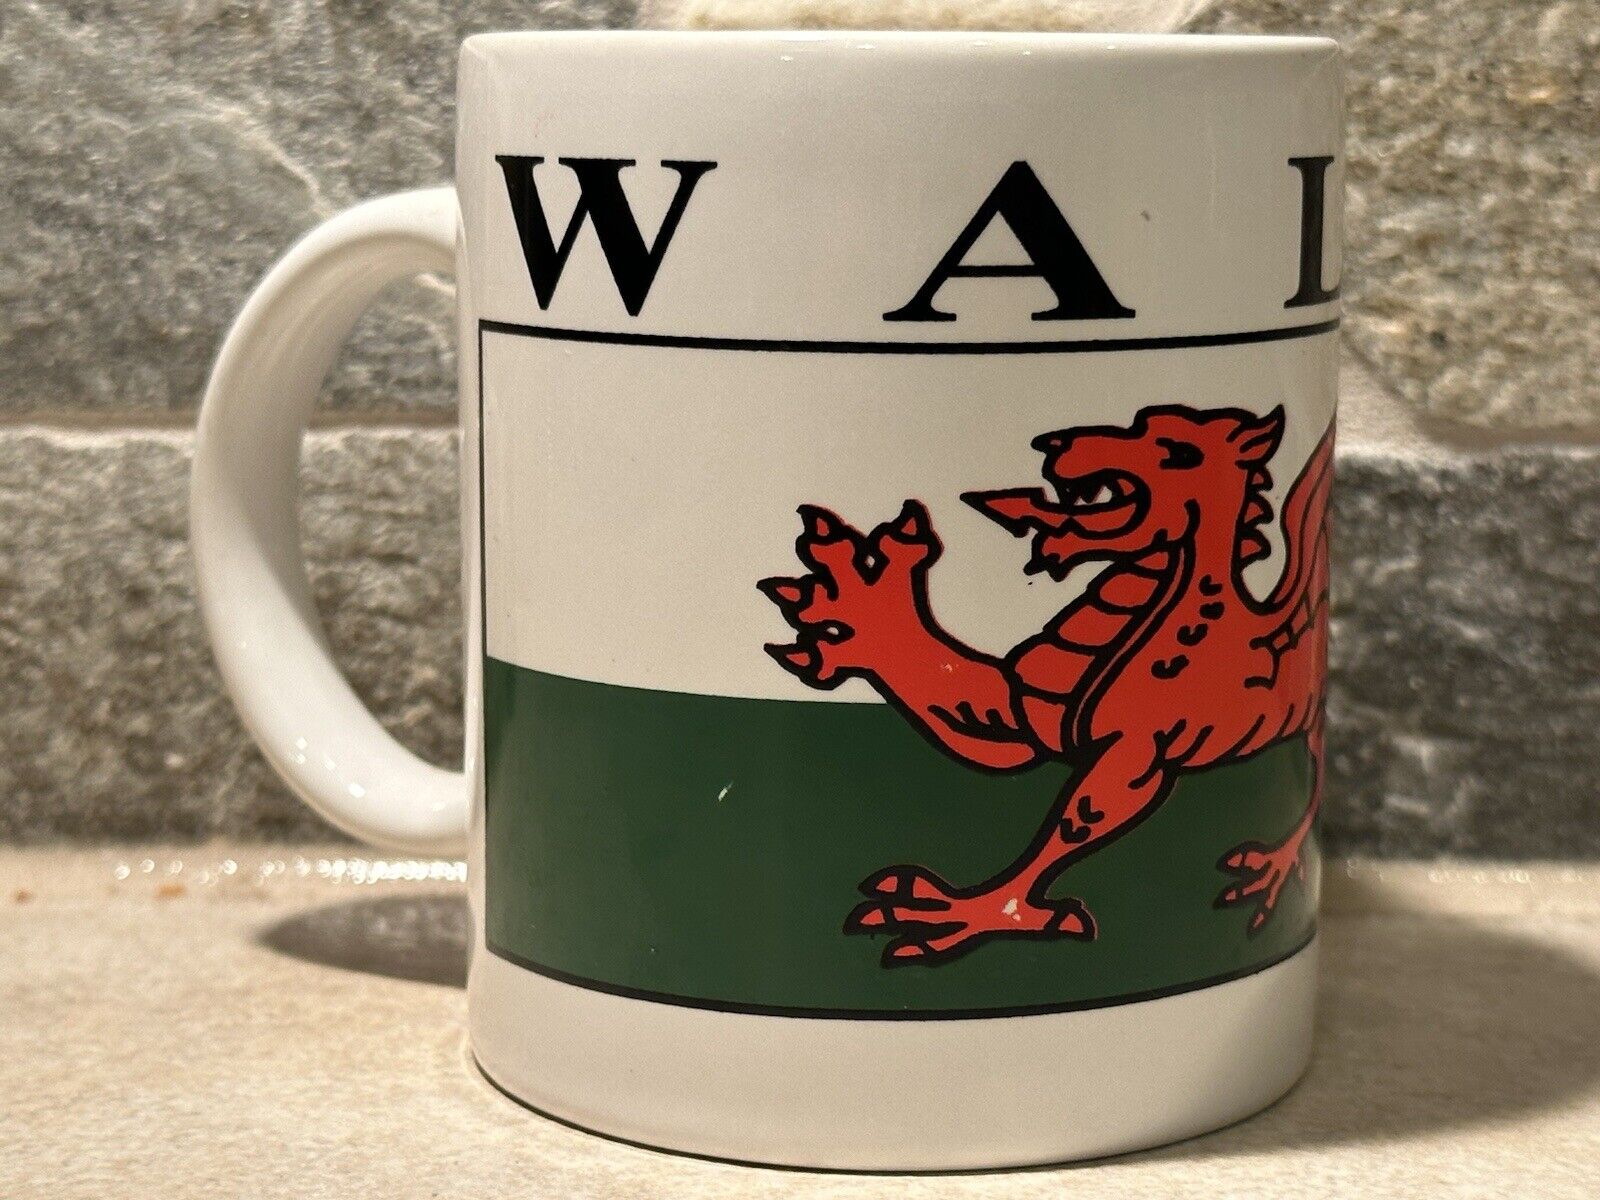 Le Pays International Inc., WALES with Red Dragon Logo Coffee Cup/mug. Welsh